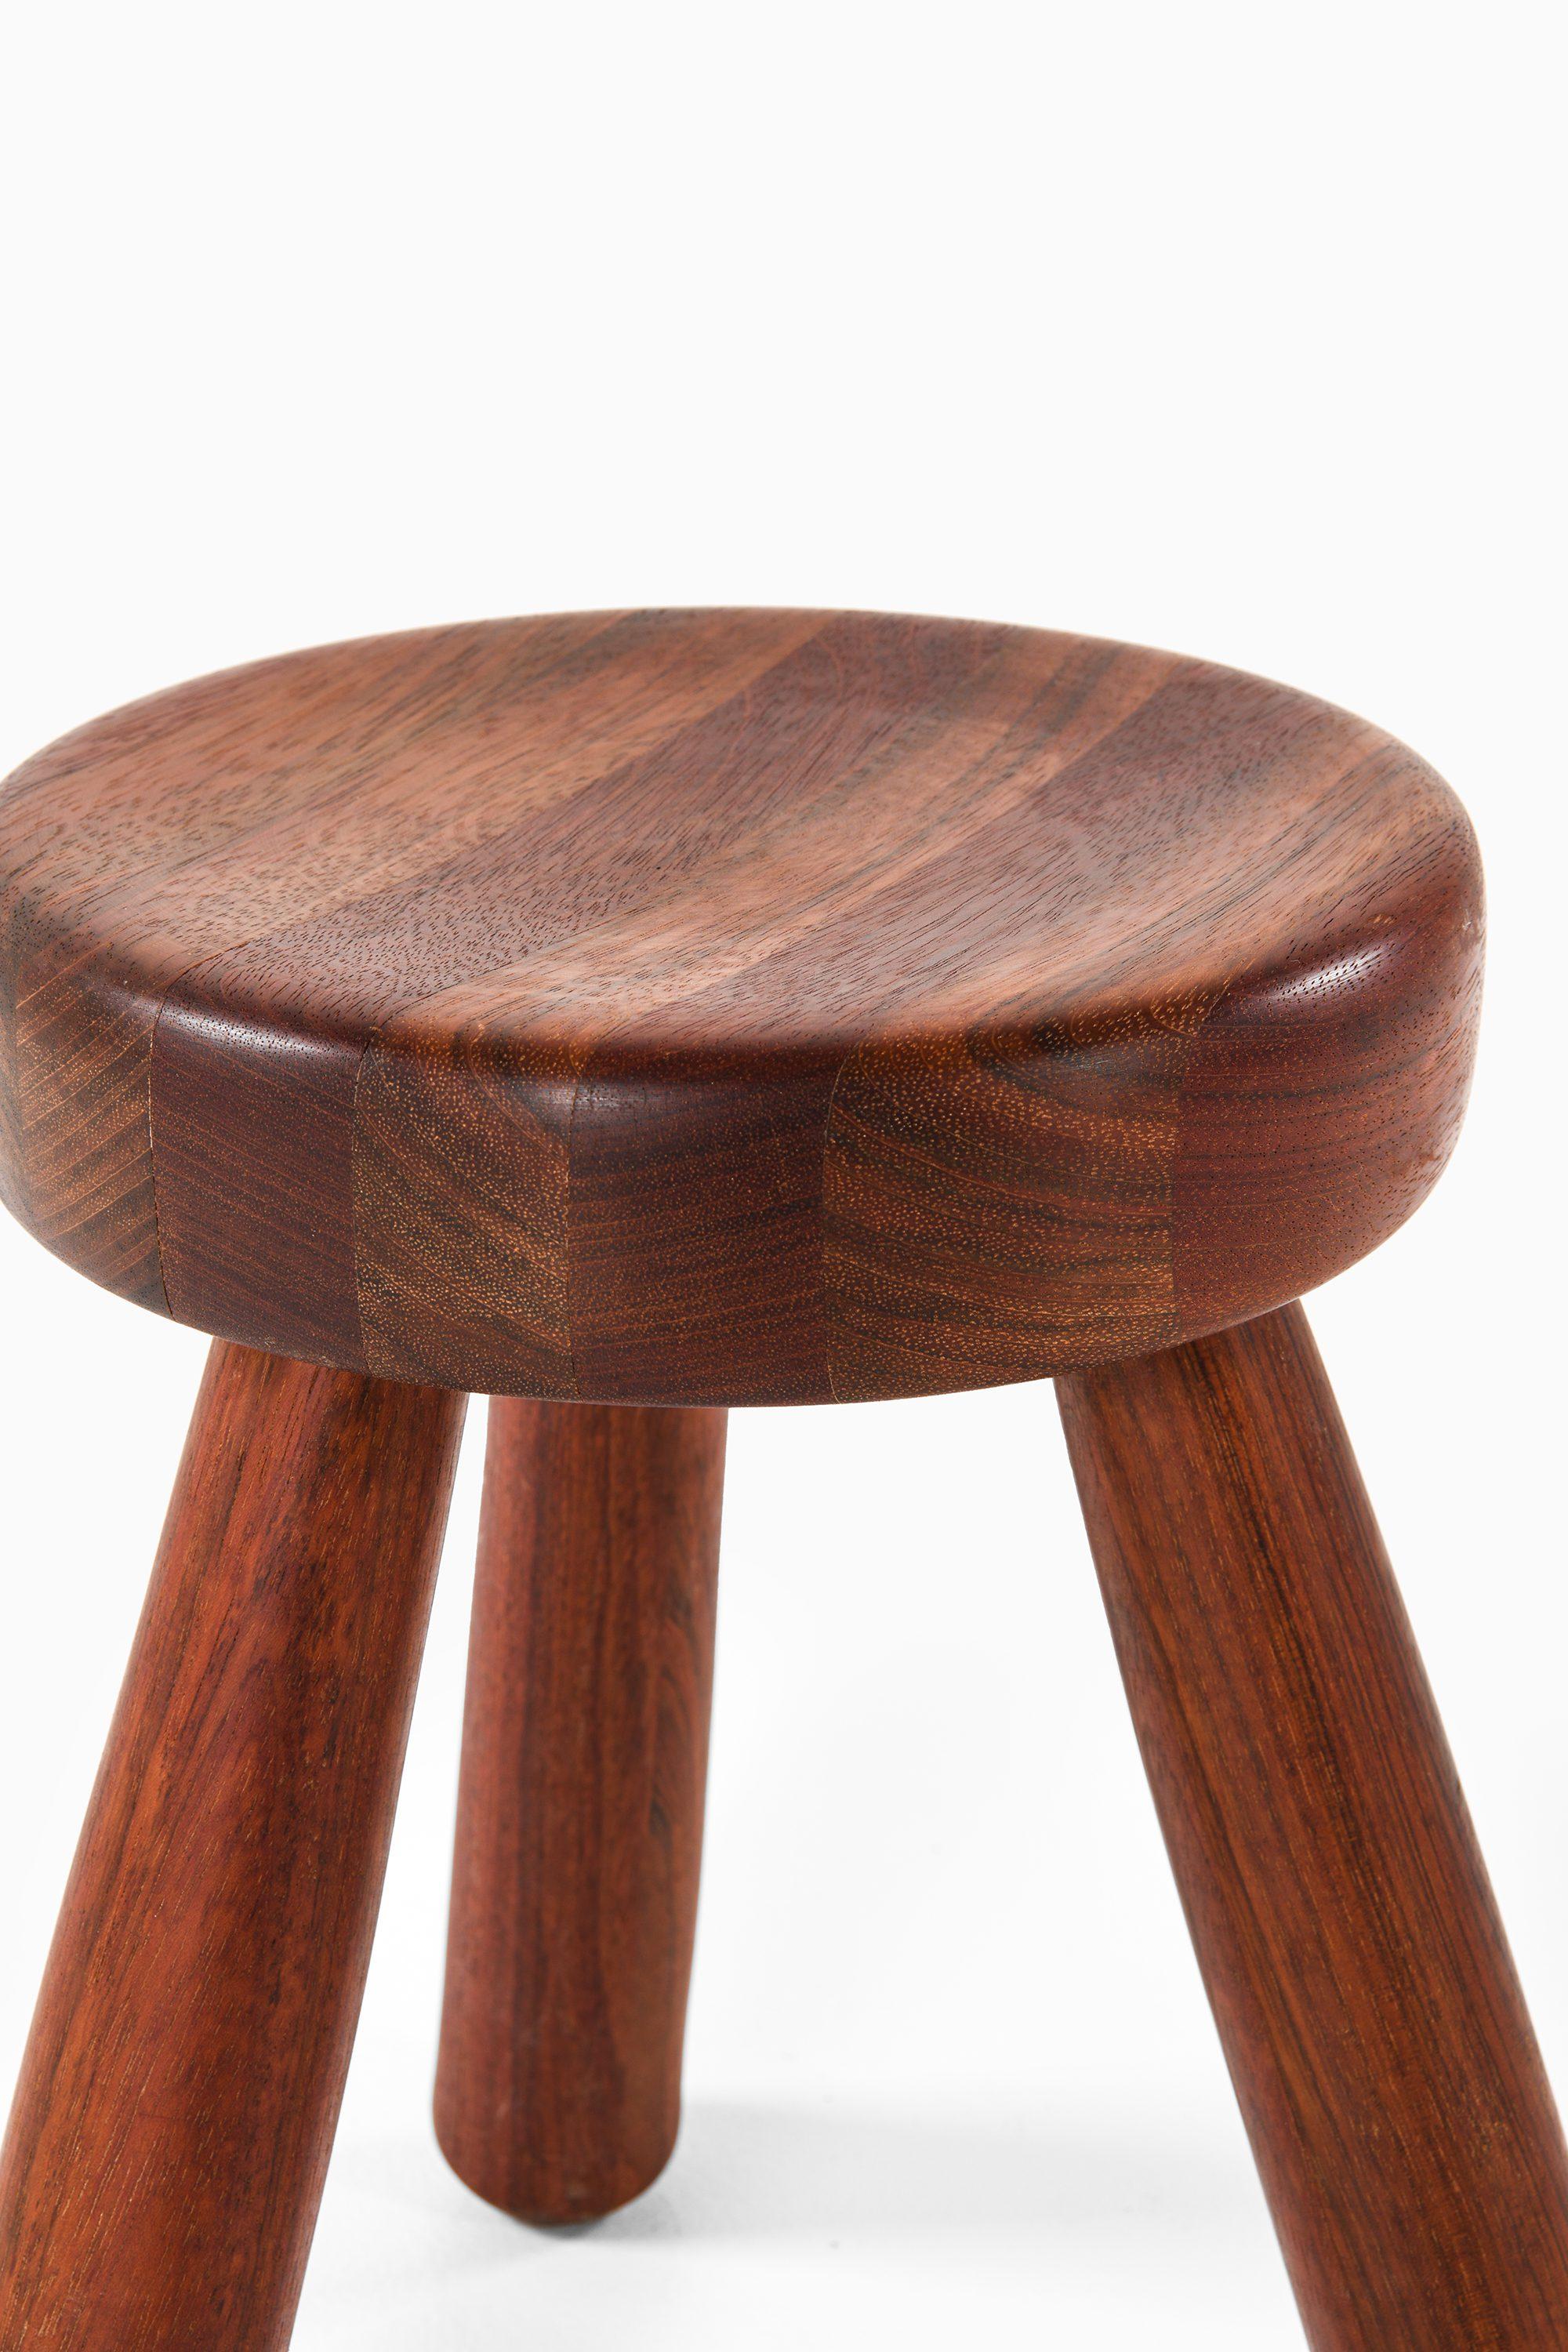 20th Century Large Stool in Jatoba Wood by Ingvar Hildingsson, 1980's For Sale